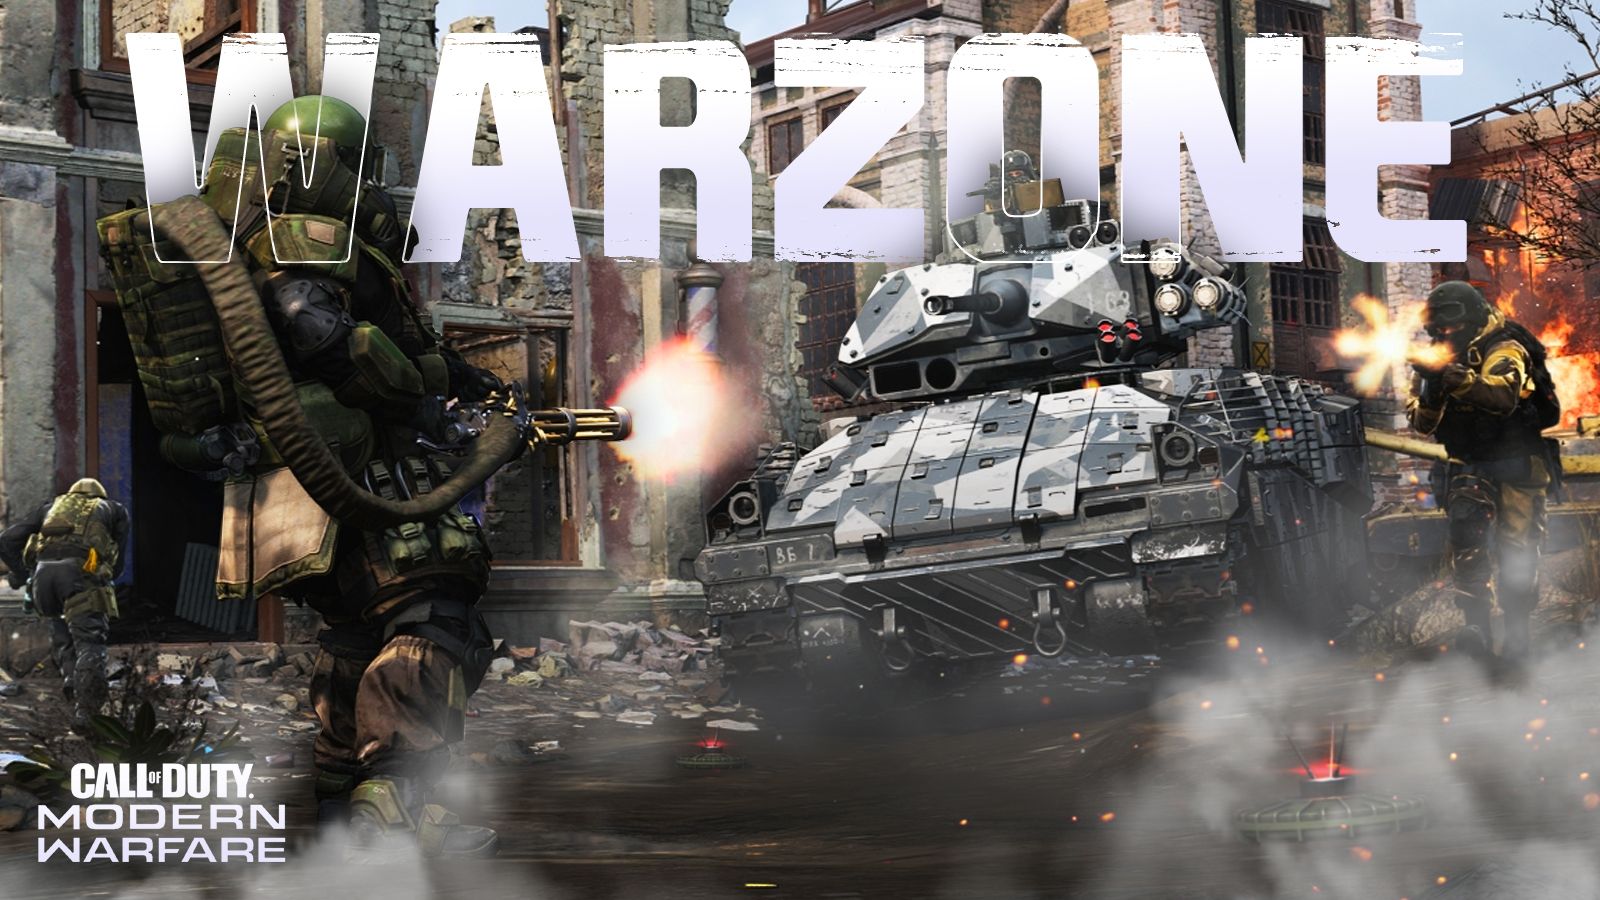 When is Call of Duty Warzone coming out then?